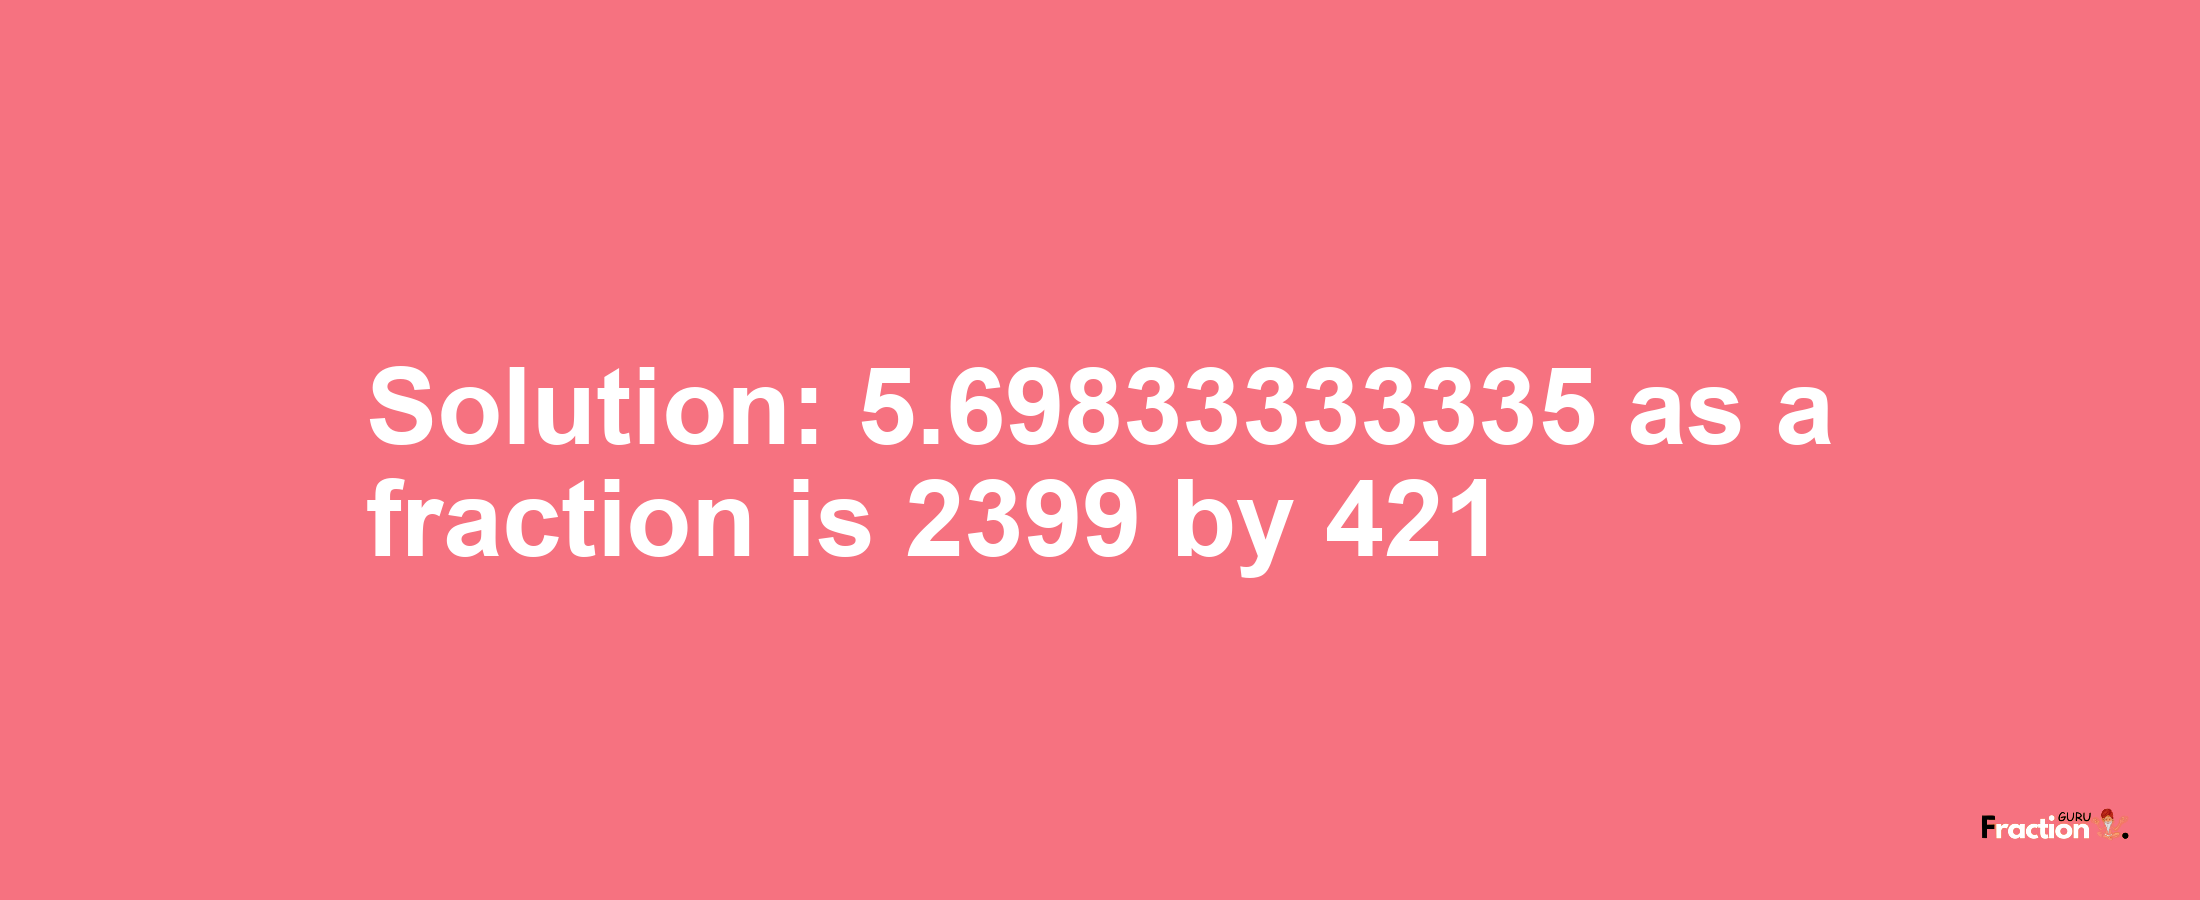 Solution:5.69833333335 as a fraction is 2399/421